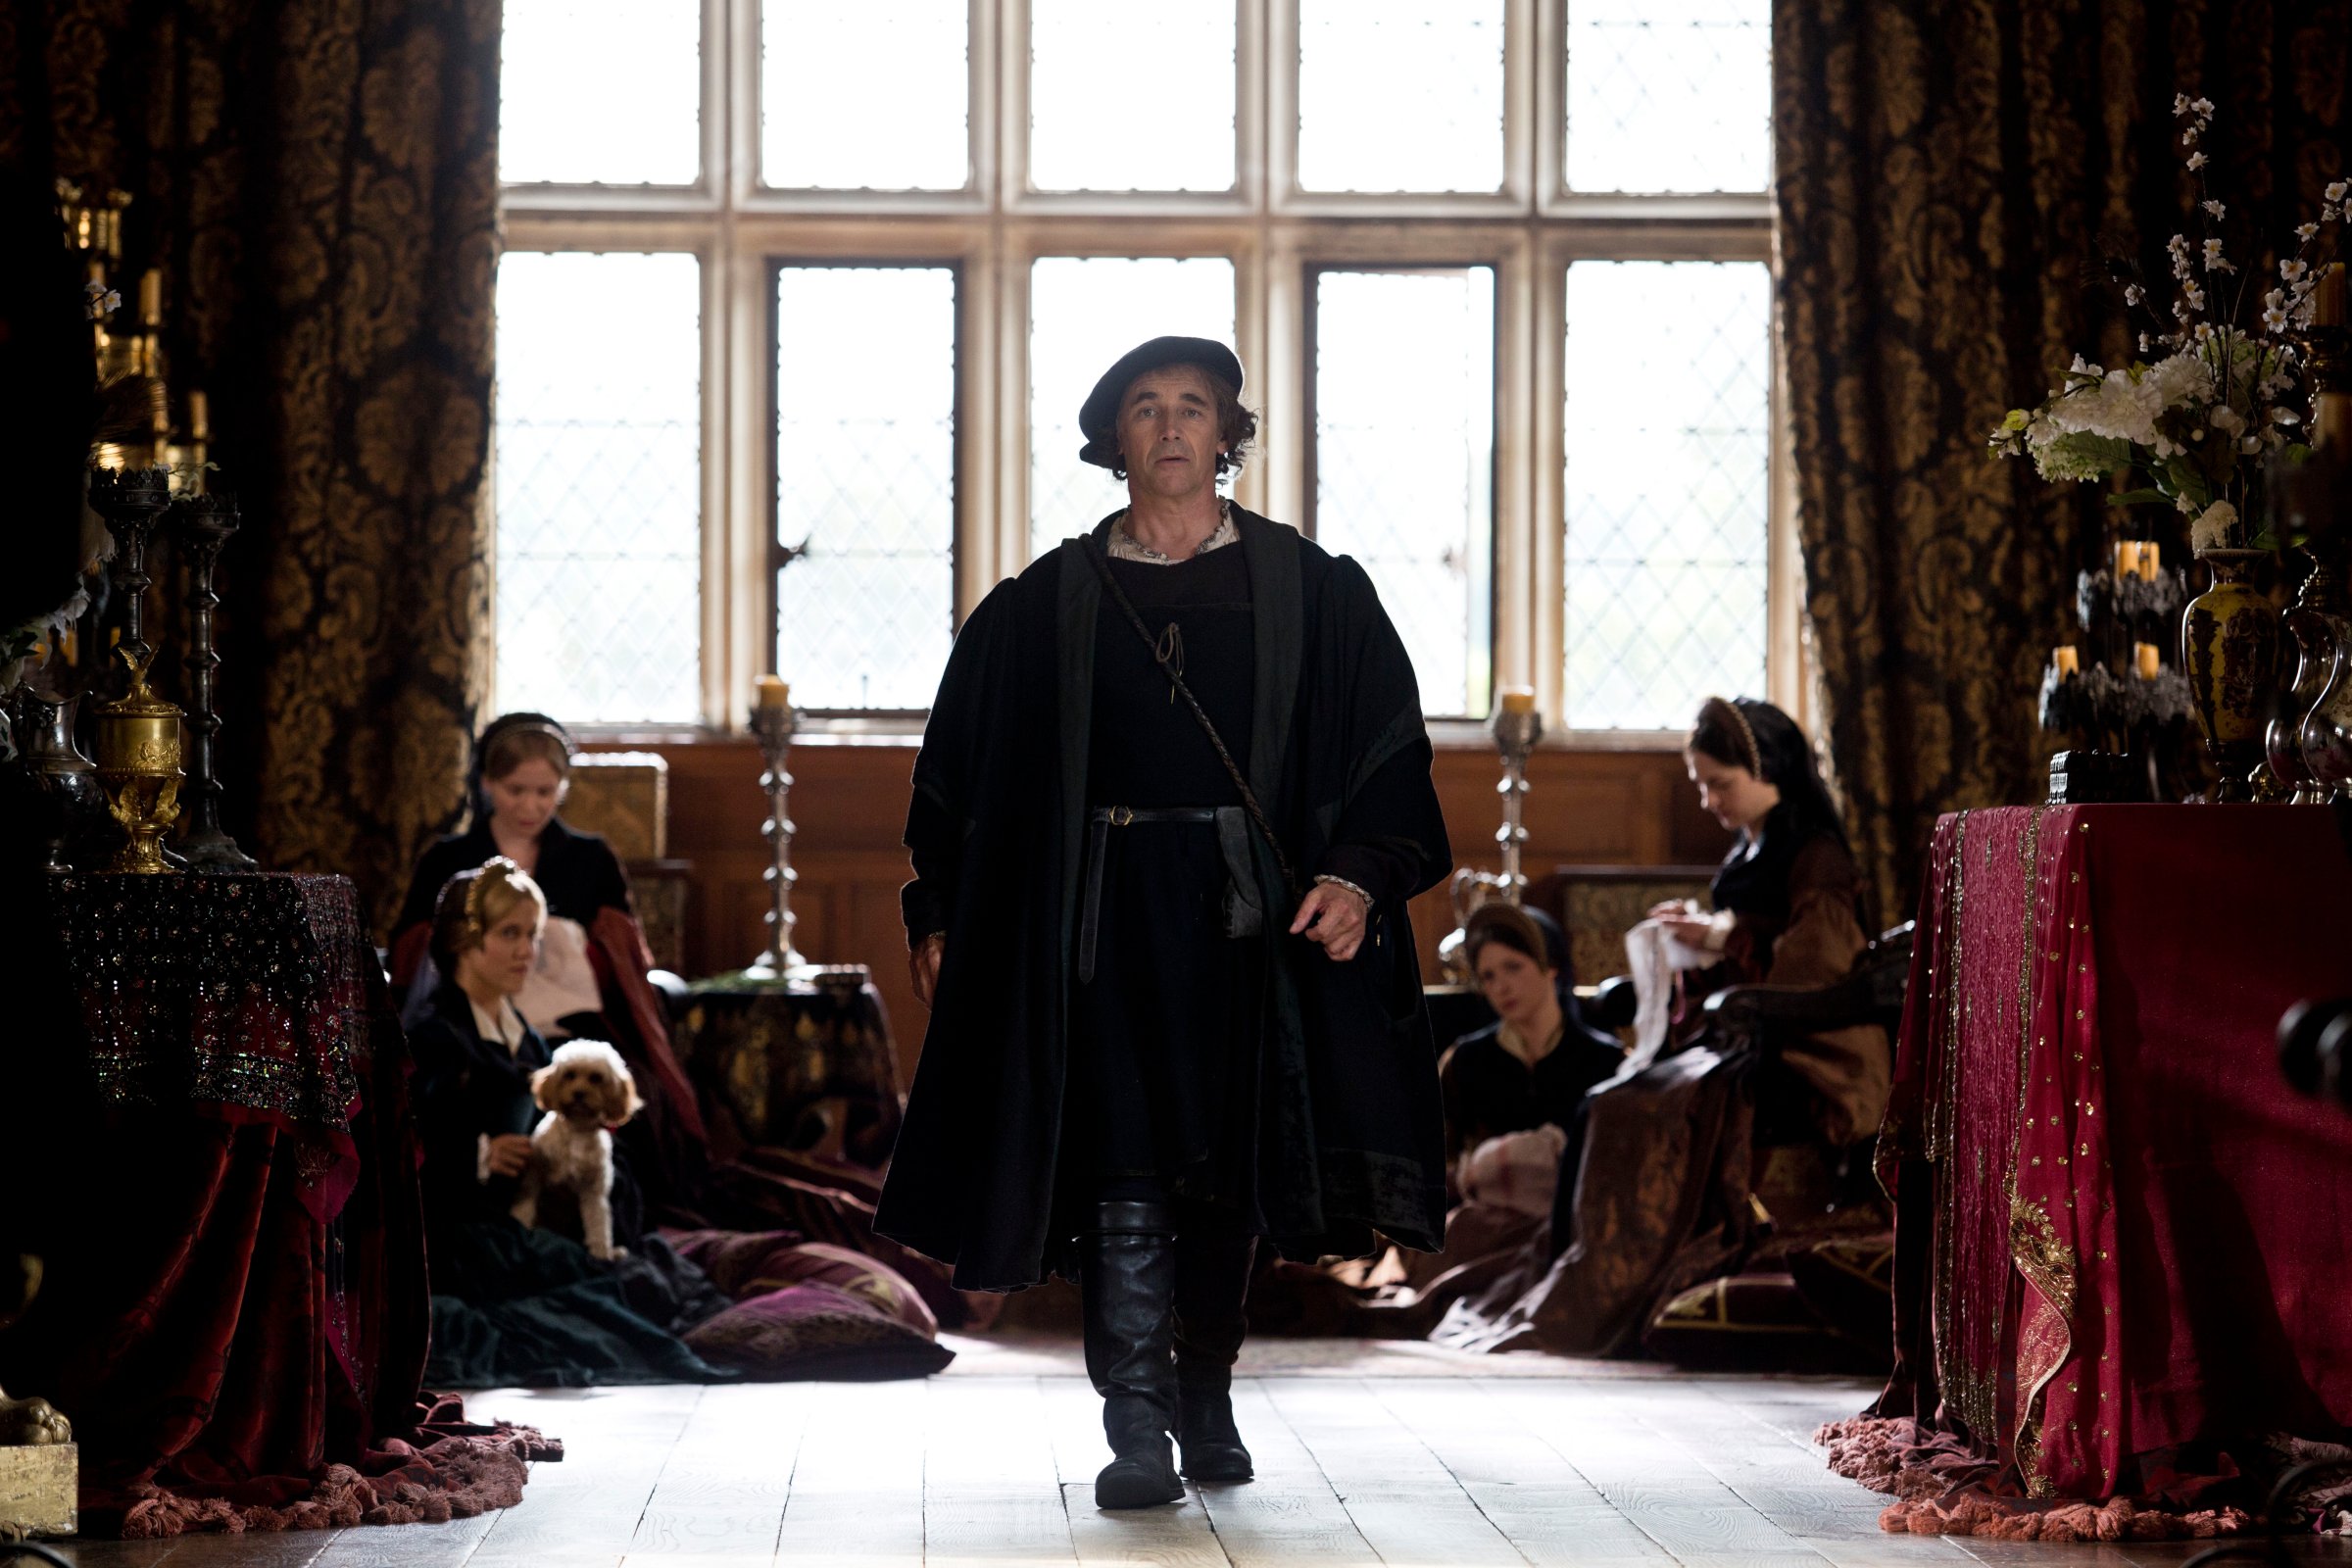 Wolf HallSundays, April 5 - May 10, 2015 on MASTERPIECE on PBSPart OneSunday, April 5, 2015 at 10pm ETHaving failed to secure the annulment of the King’s marriage to Katherine of Aragon,Cardinal Wolsey is stripped of his powers. His hopes of returning to the King’s favor lie inthe ever-loyal Thomas Cromwell.Shown: Mark Rylance as Thomas Cromwell(C) Giles Keyte/Playground &amp; Company Pictures for MASTERPIECE/BBCThis image may be used only in the direct promotion of MASTERPIECE. No other rights are granted. All rights are reserved. Editorial use only.